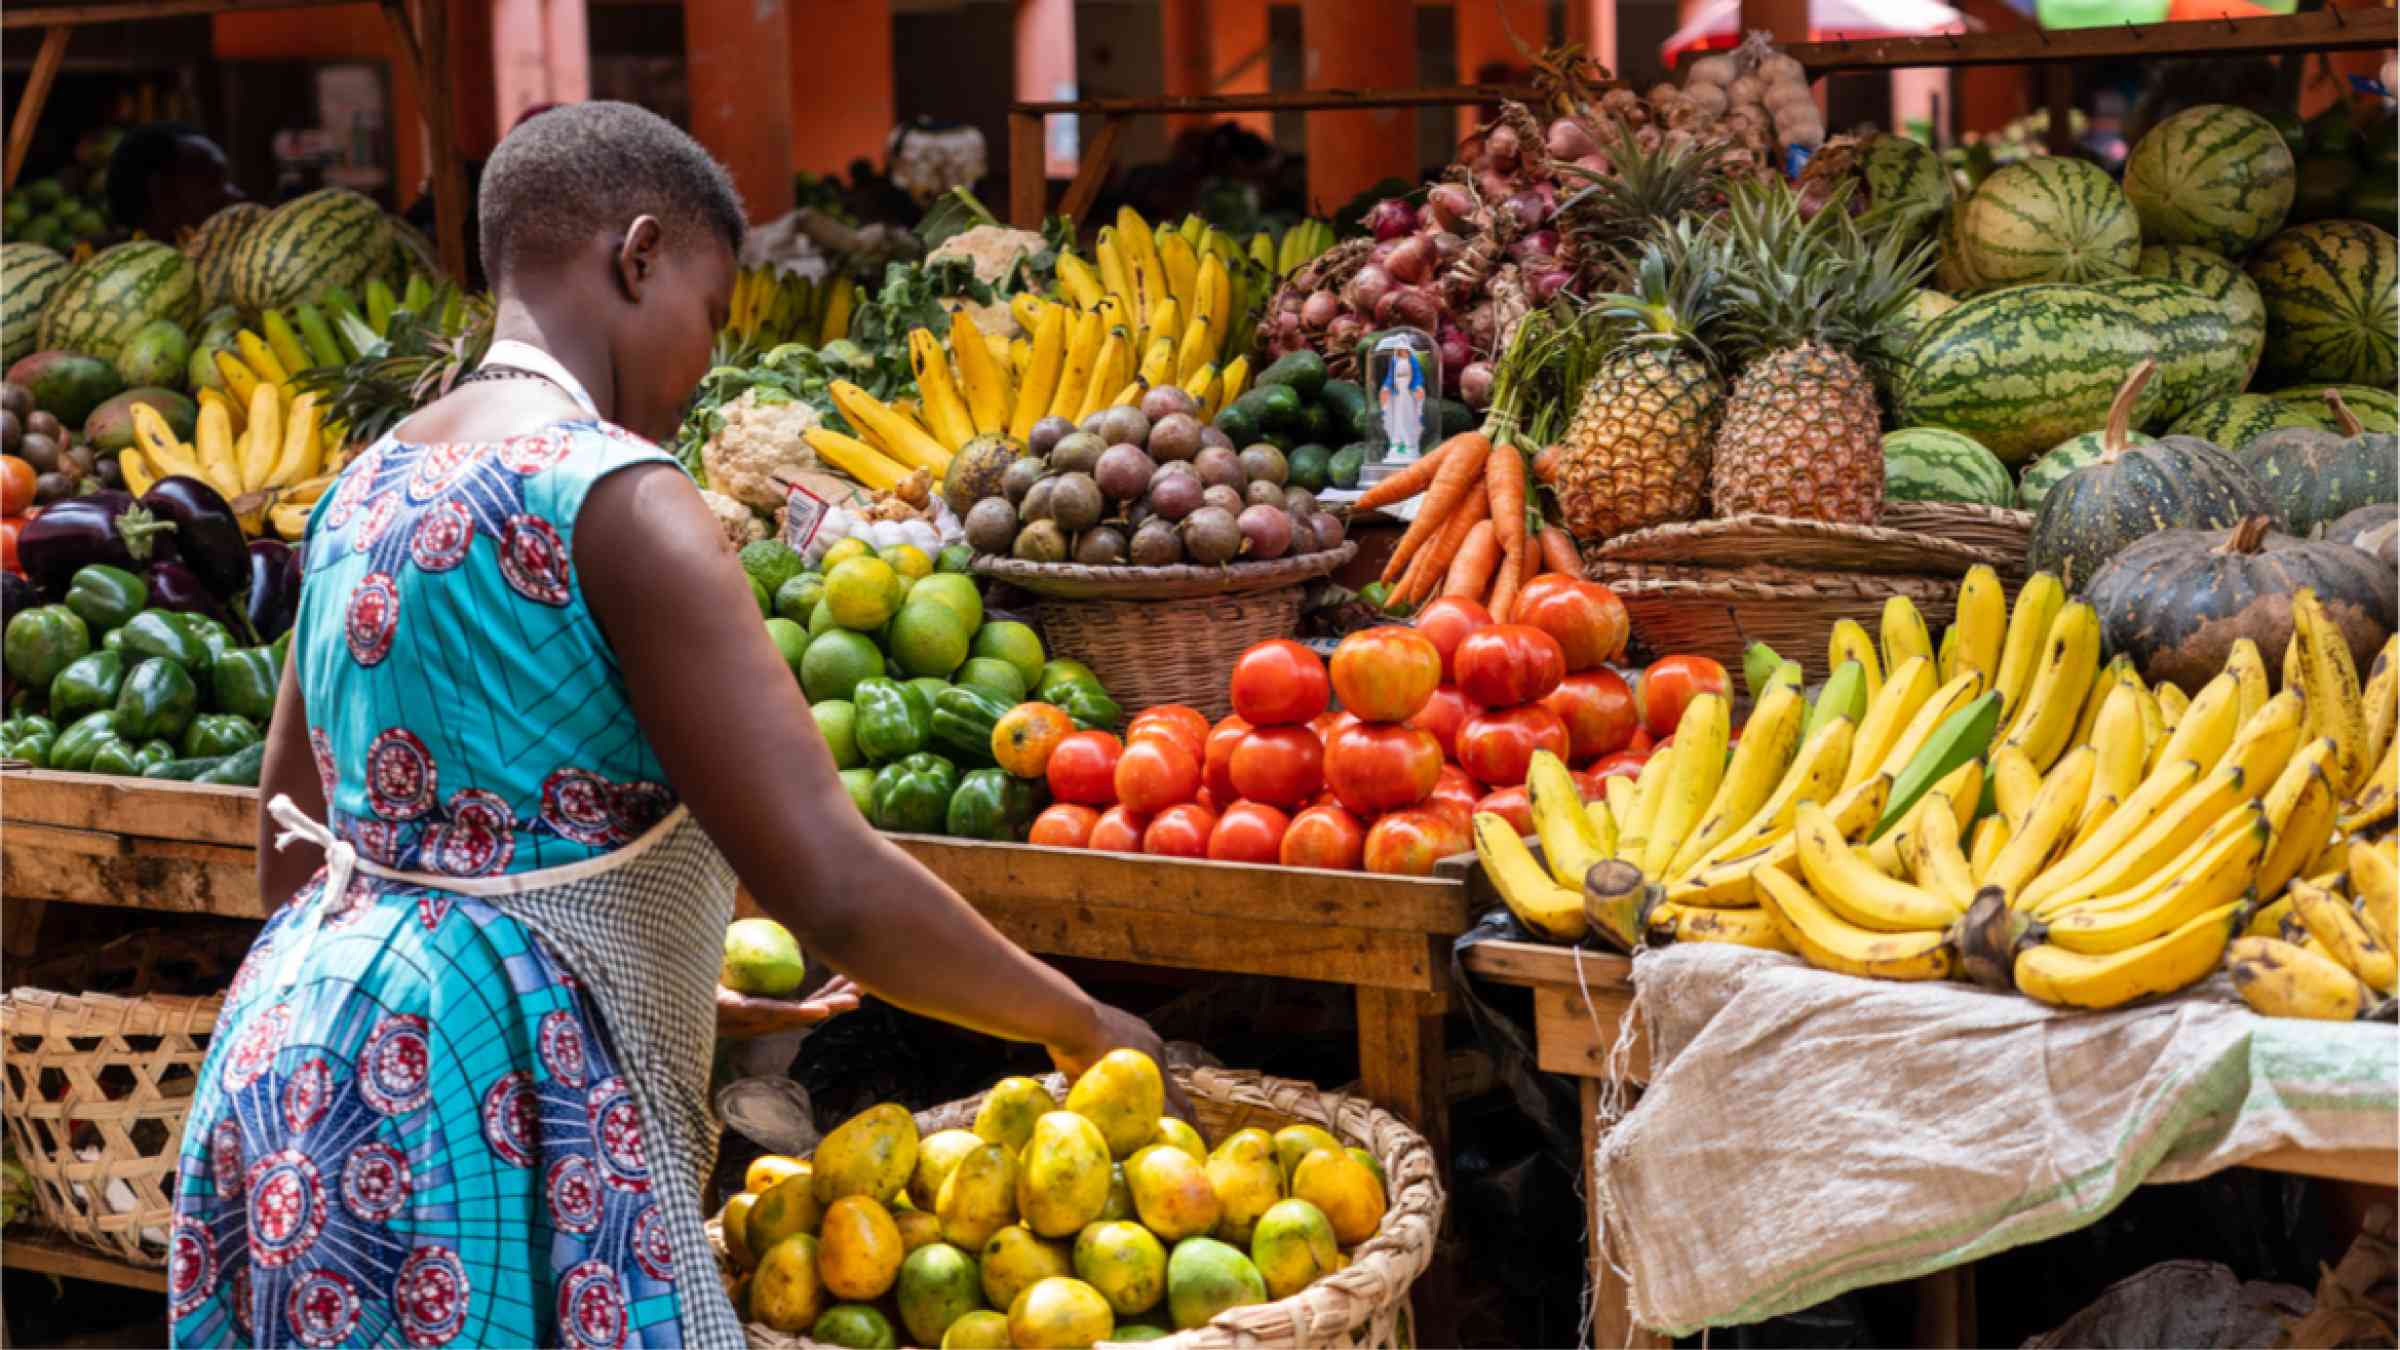 Woman at a fruit market in Africa.